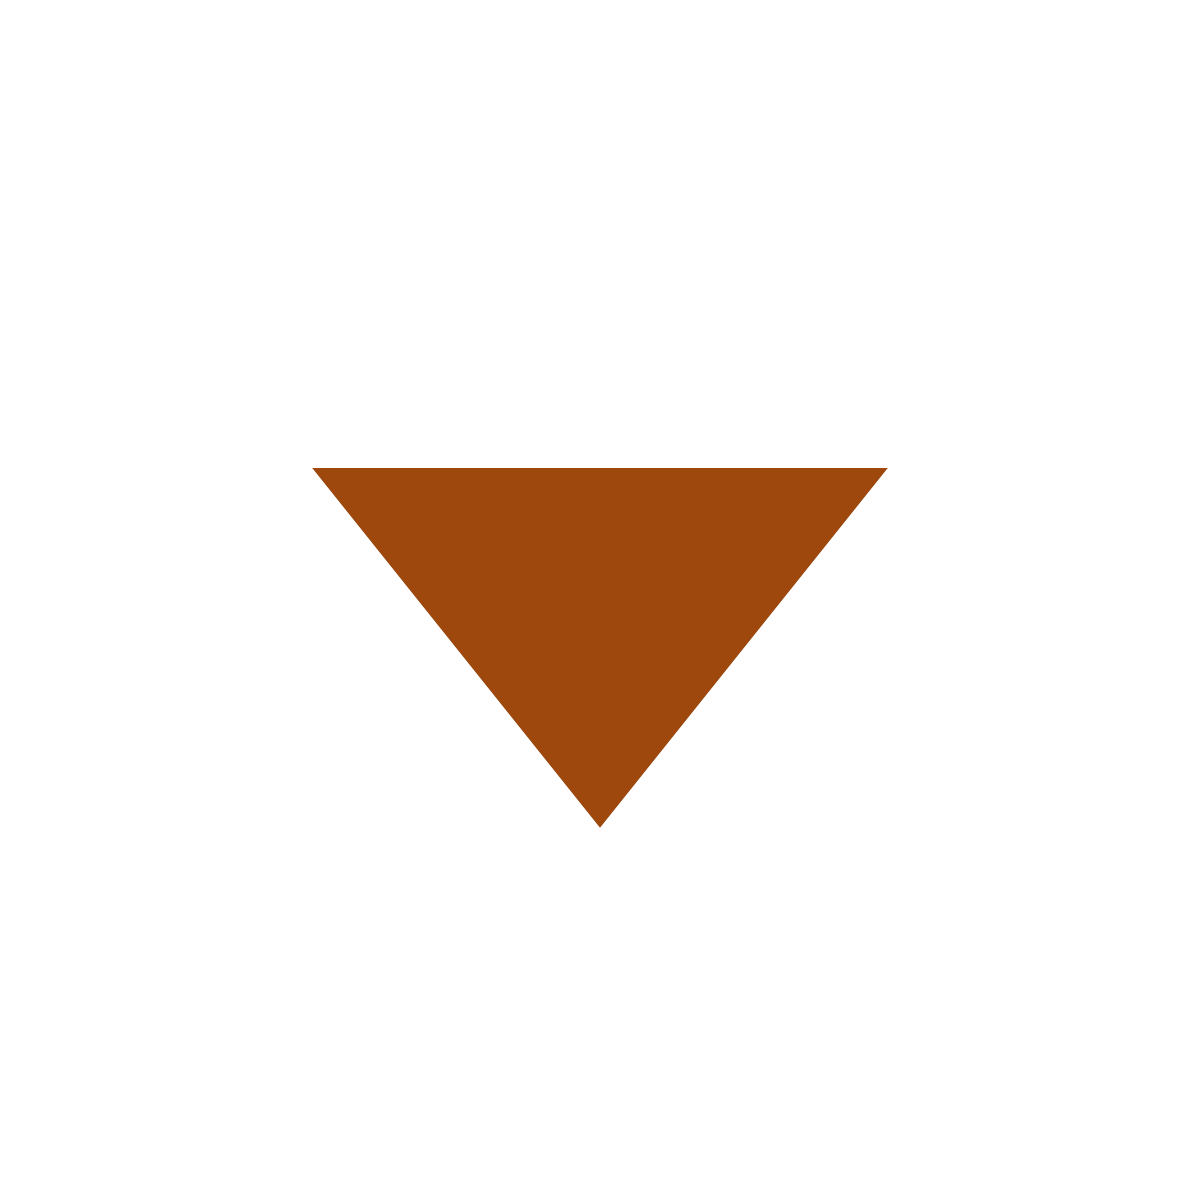 MaroonDownTriangle.png